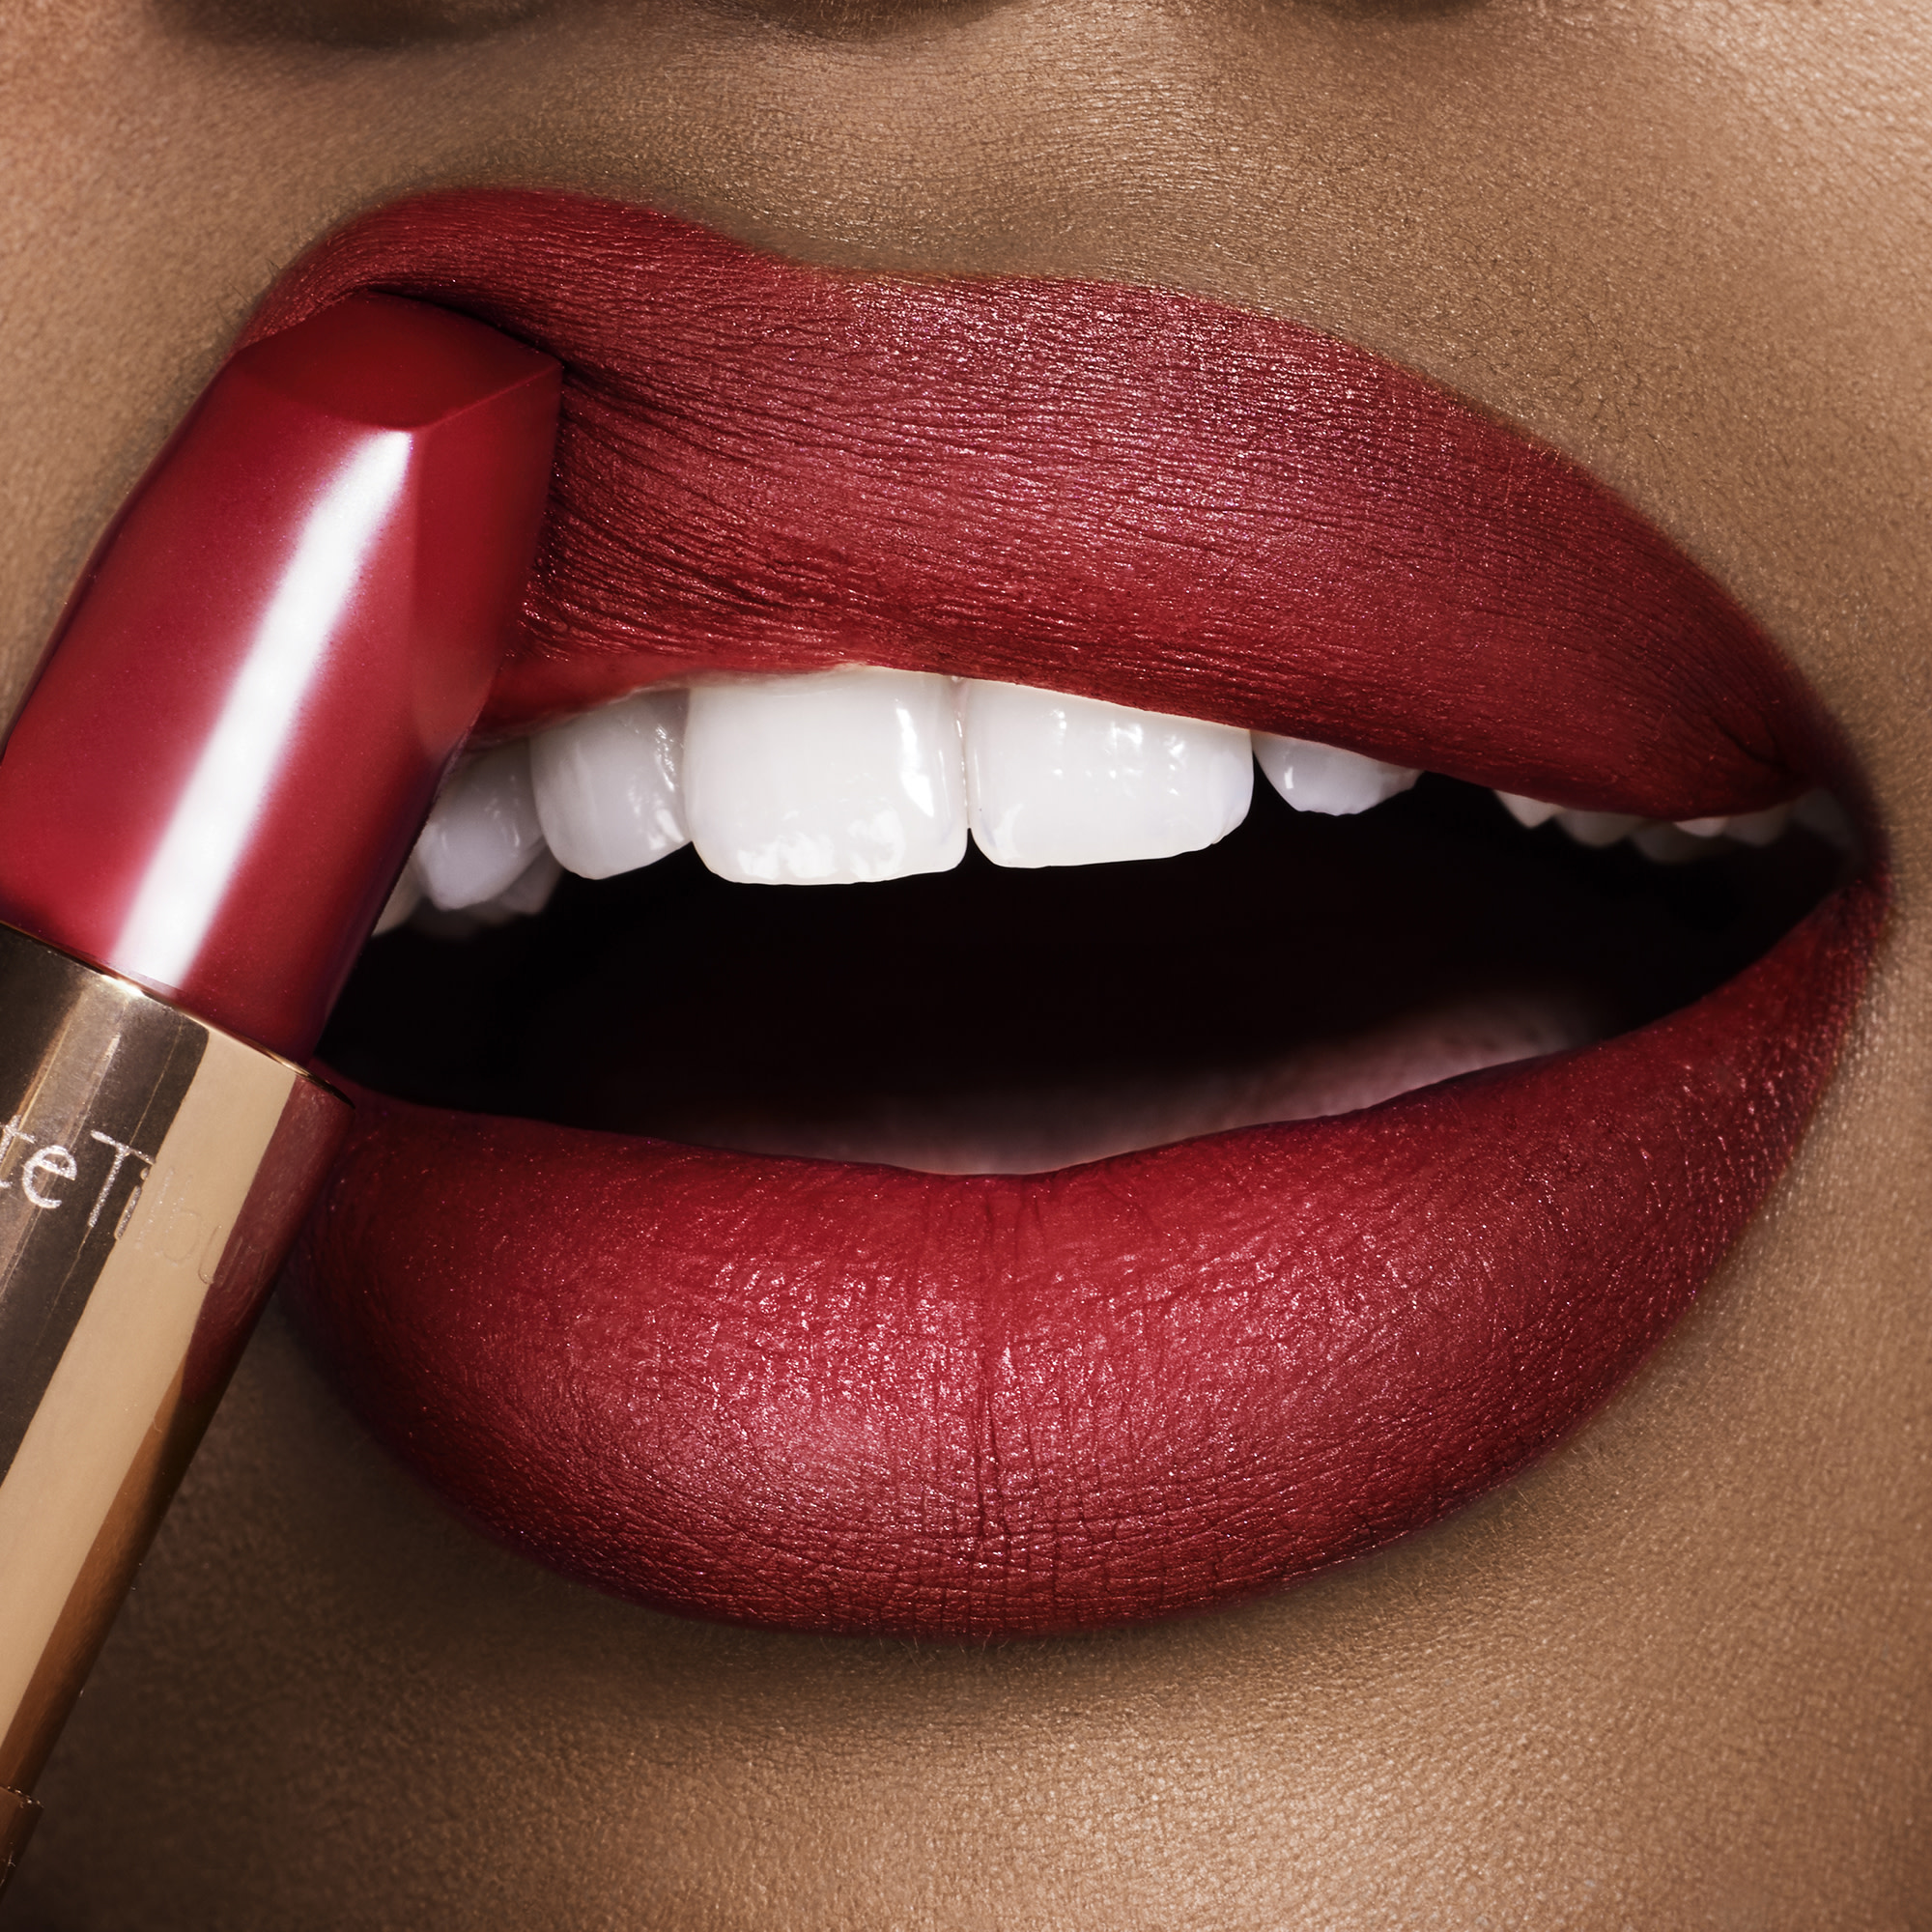 Lips close-up of a deep-tone model applying a soft, neutral wine-coloured lipstick with a matte finish.